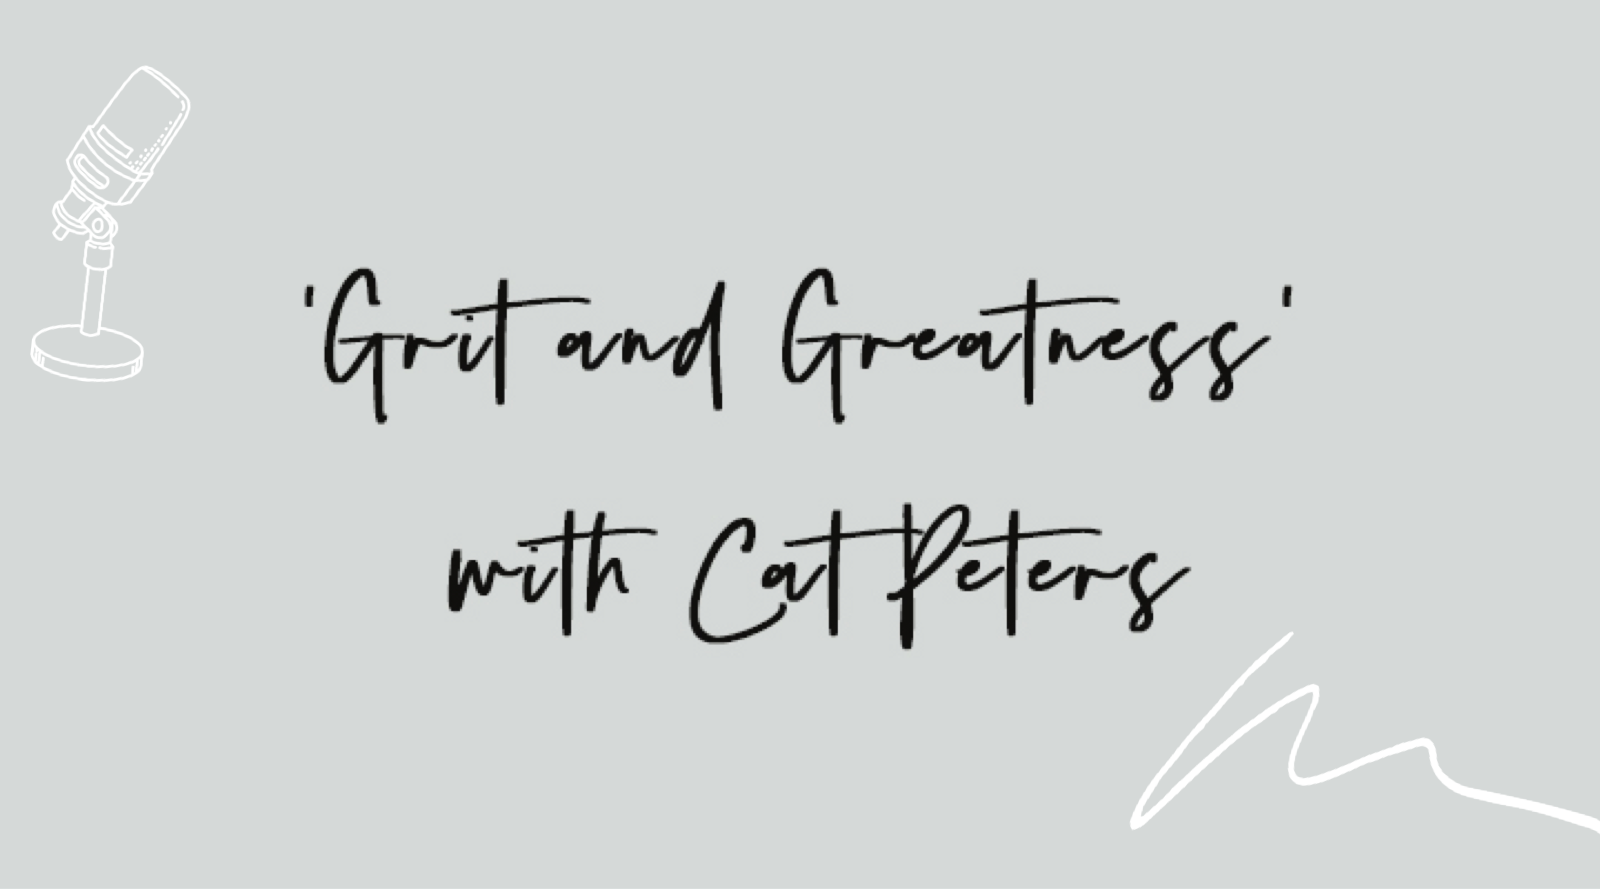 Lindsay chats with Cat Peters from 'Grit and Greatness' podcast about how her passion became a reality!